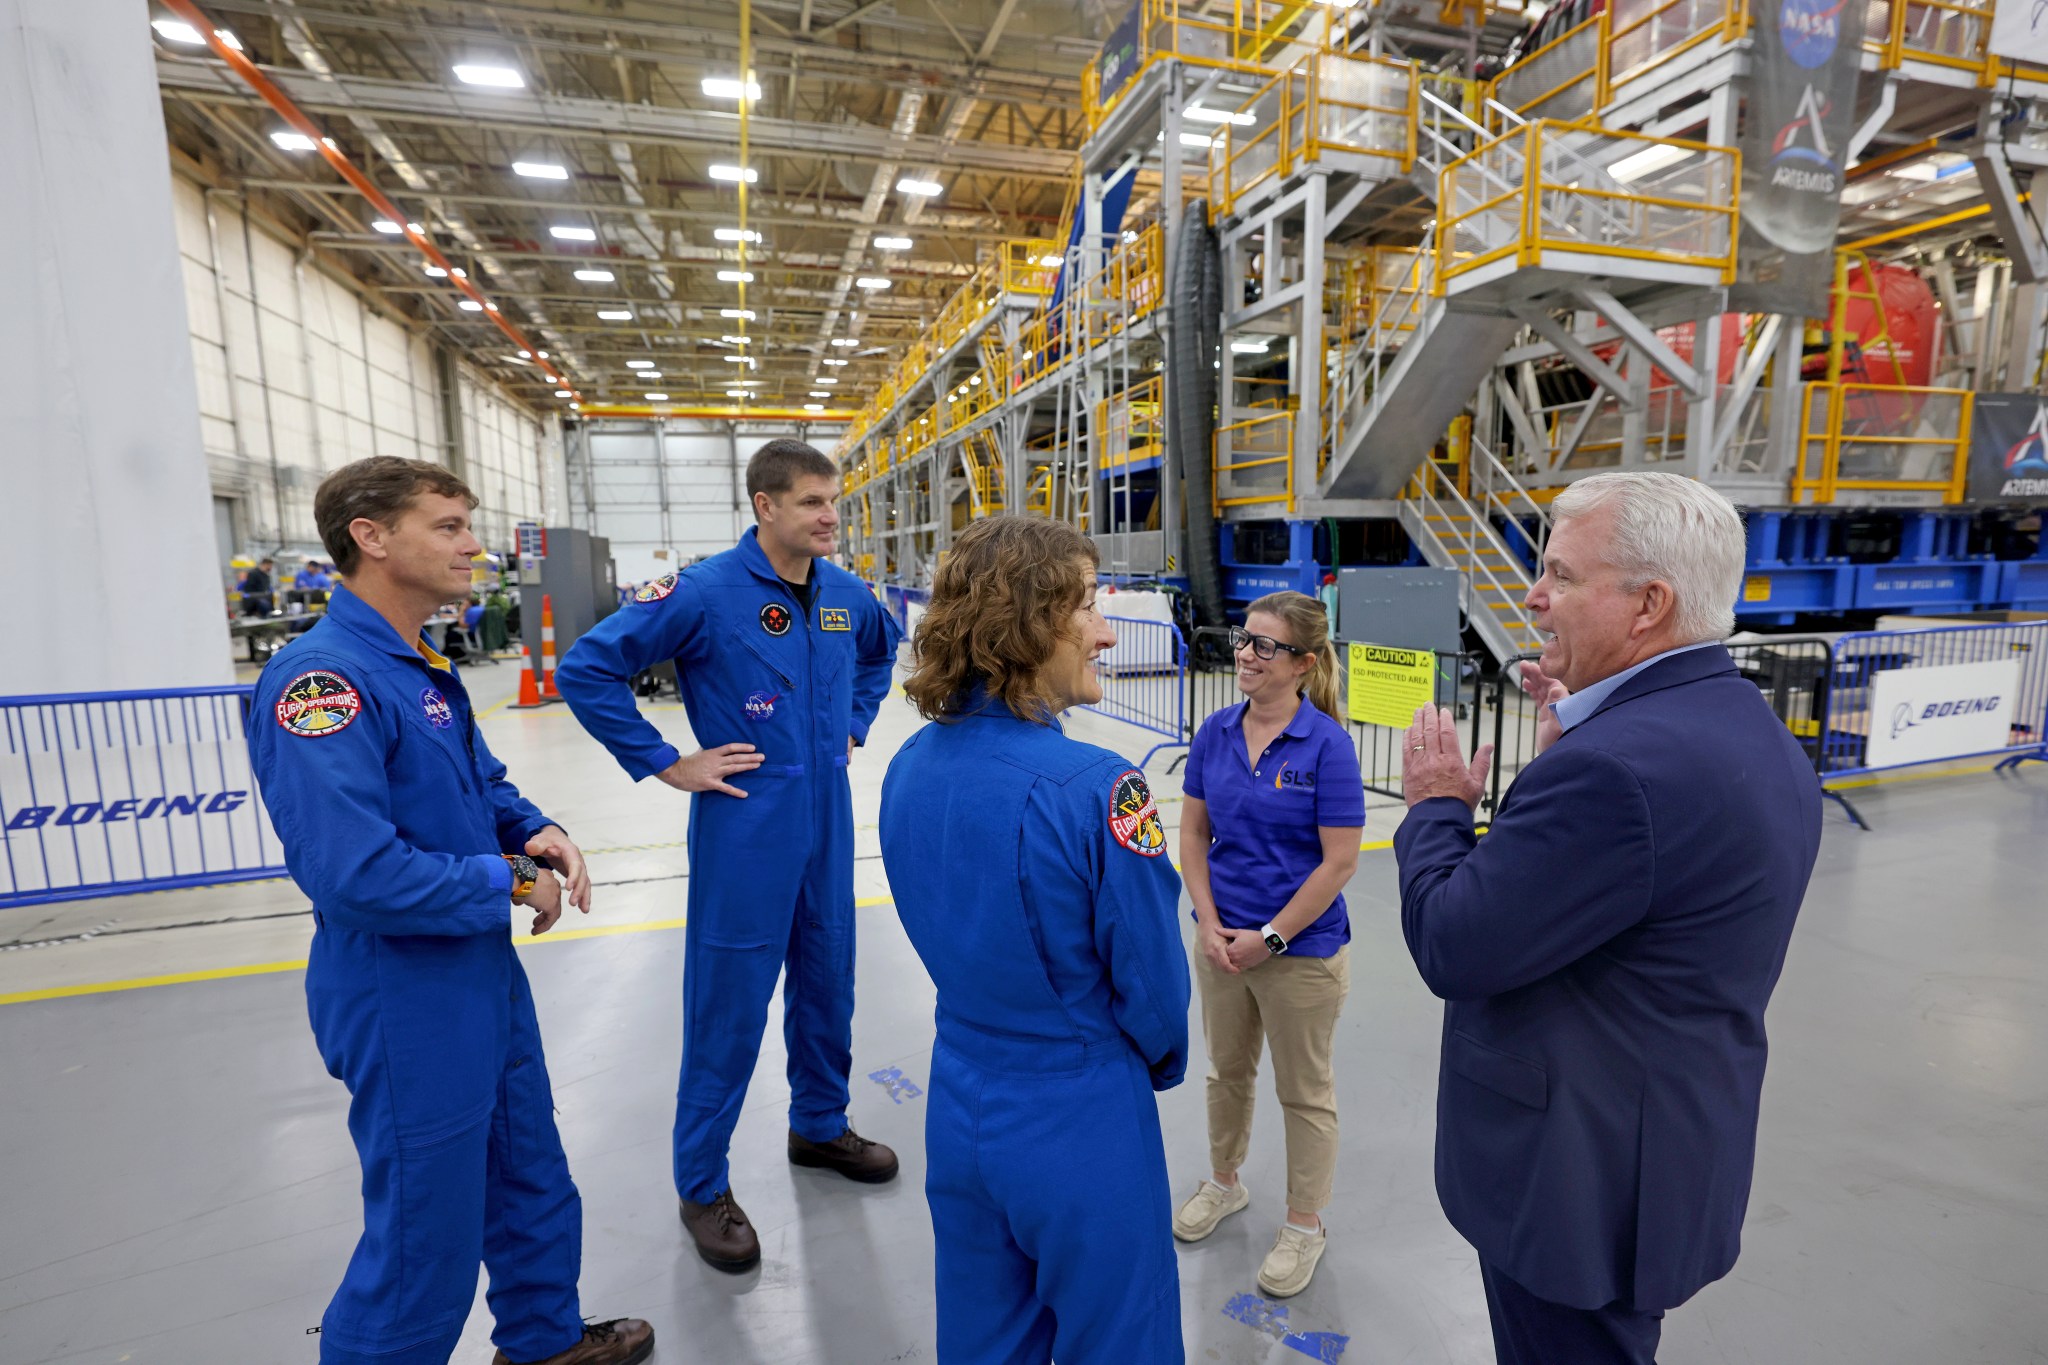 From left to right, NASA astronaut Reid Wiseman, CSA astronaut Jeremy Hansen, NASA astronaut Christina Koch, and two people stand in a circle as they have a discussion. The astronauts wear blue flight suits with various patches on them. A building with bare ceilings and concrete floors stretches far behind them.